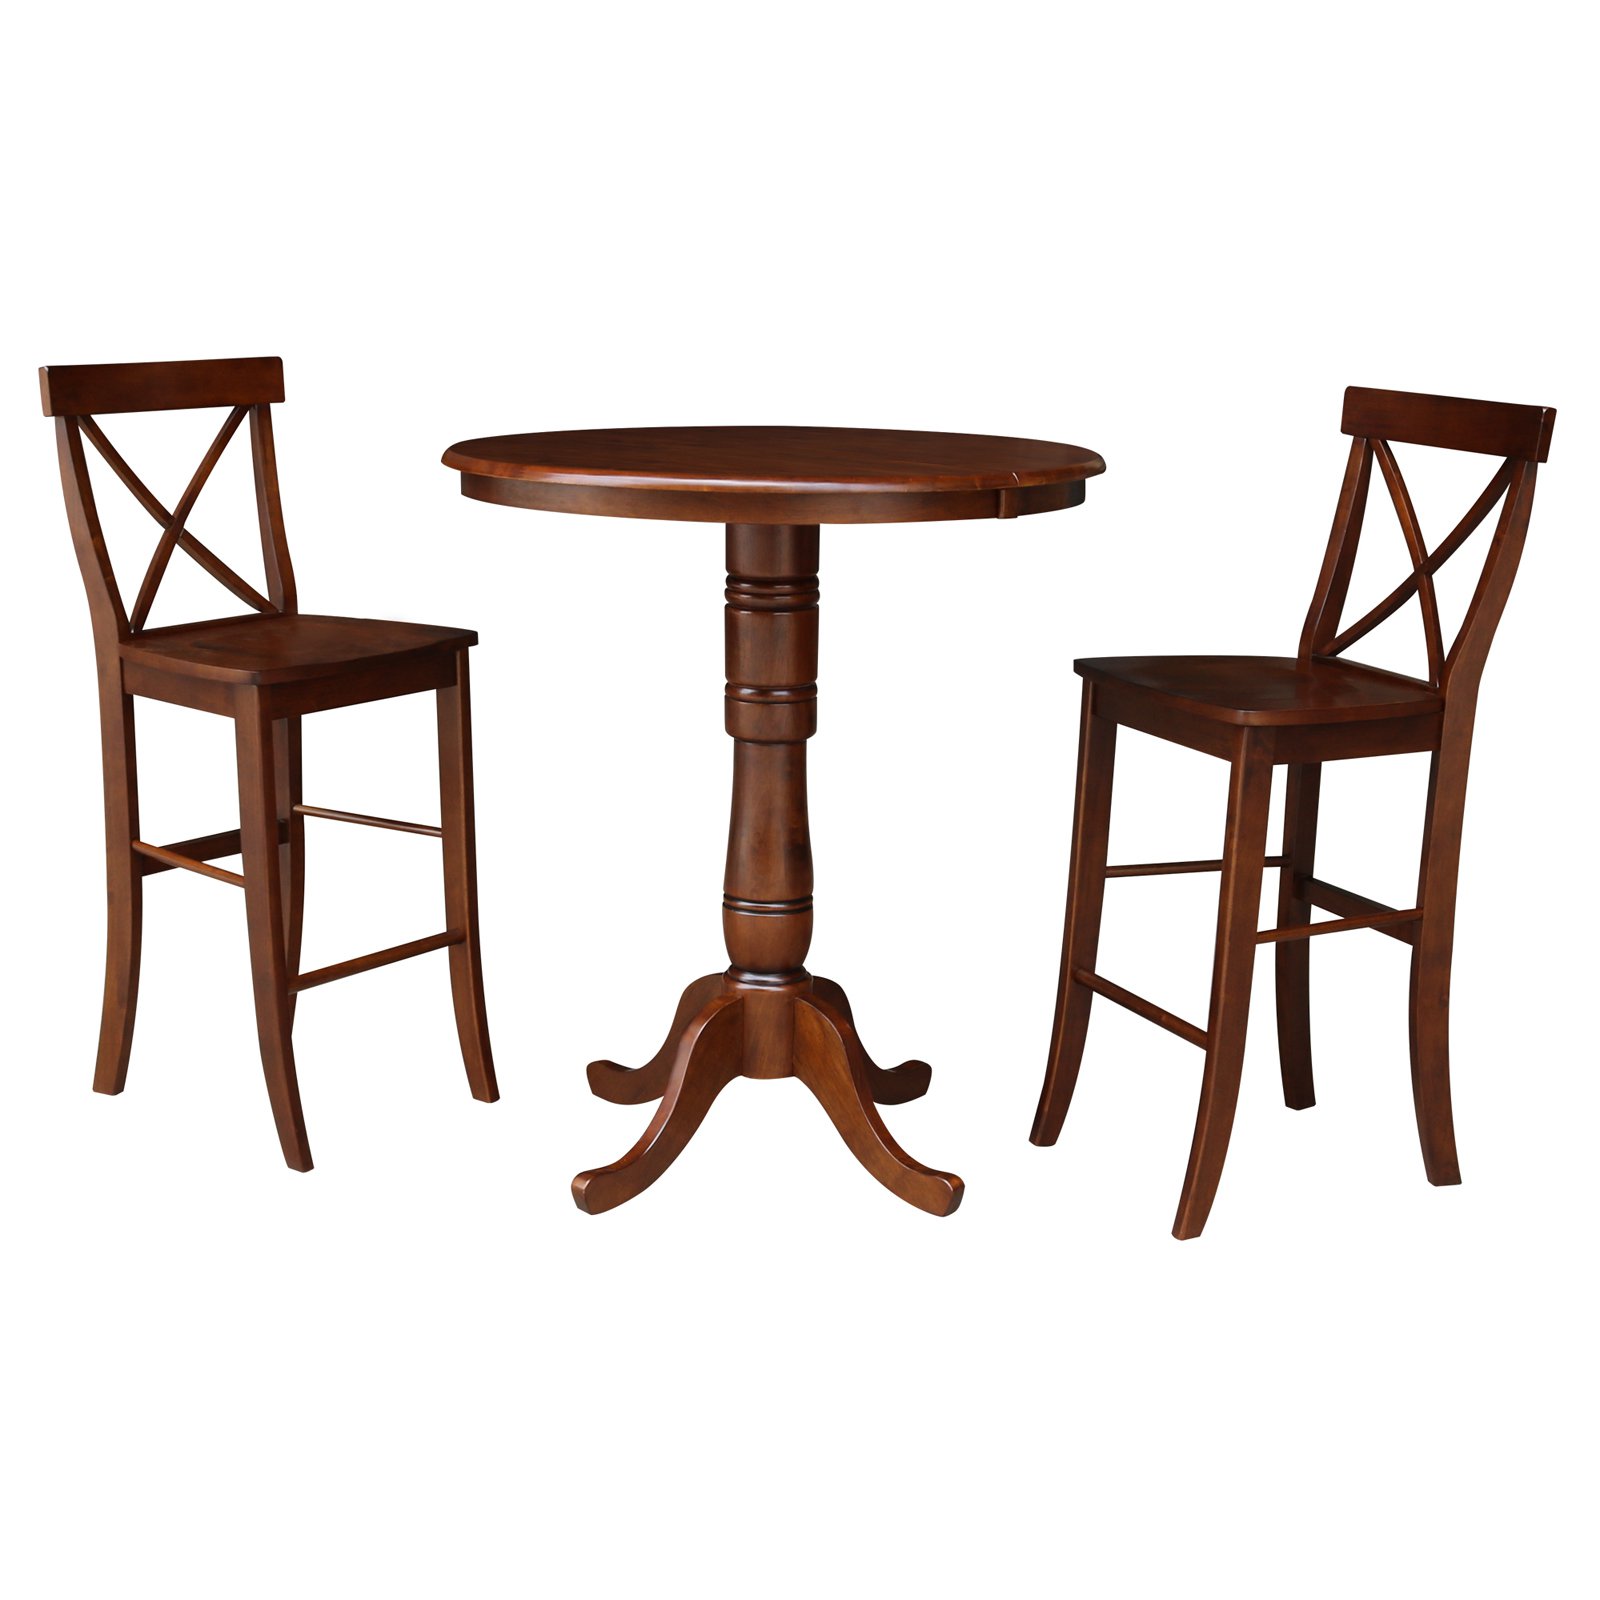 36" Round Extension Dining table with 2 X-Back Barheight Stools - Set of 3 Pieces - image 1 of 9